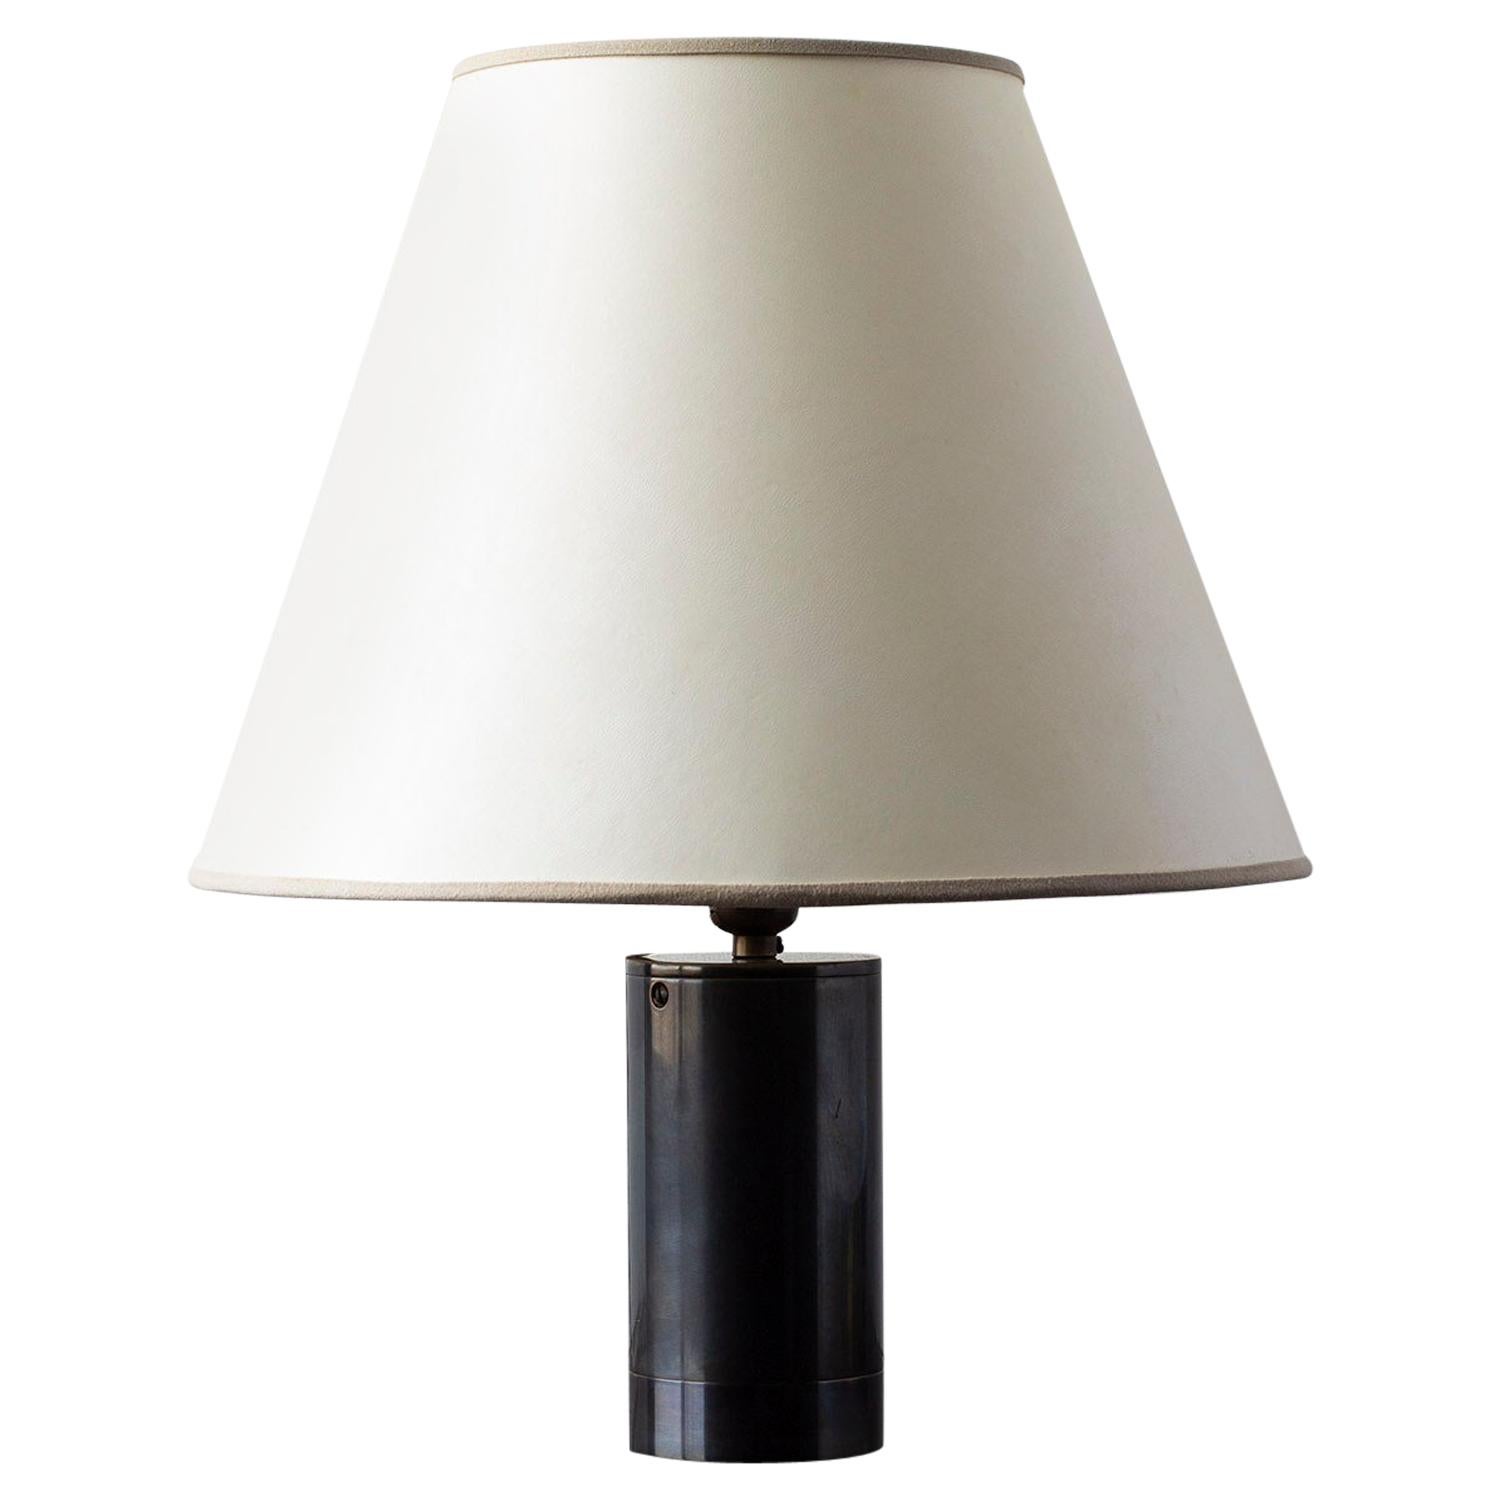 Series02 Table Lamp, Dark Patinated Brass, Goatskin Parchment Ultra Suede Trim For Sale